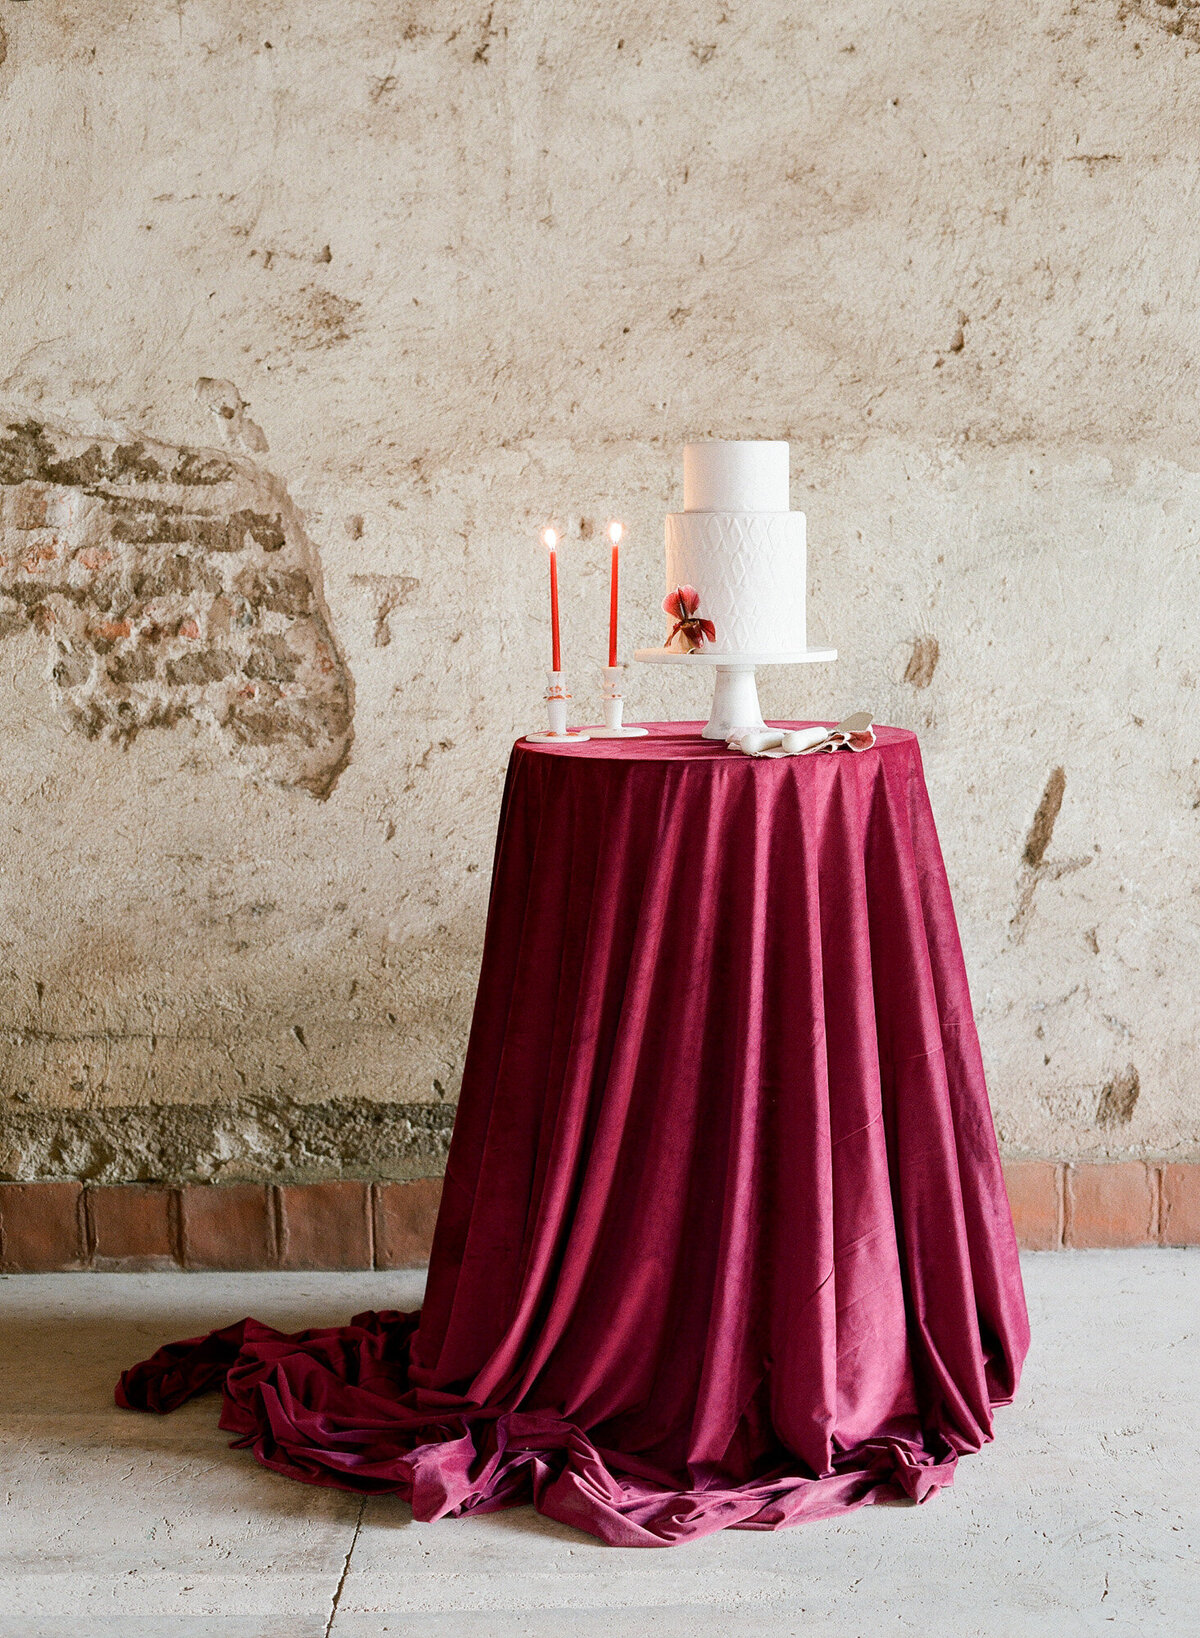 White cake and red candles placed on a tabletop with red velvet tablecloth.